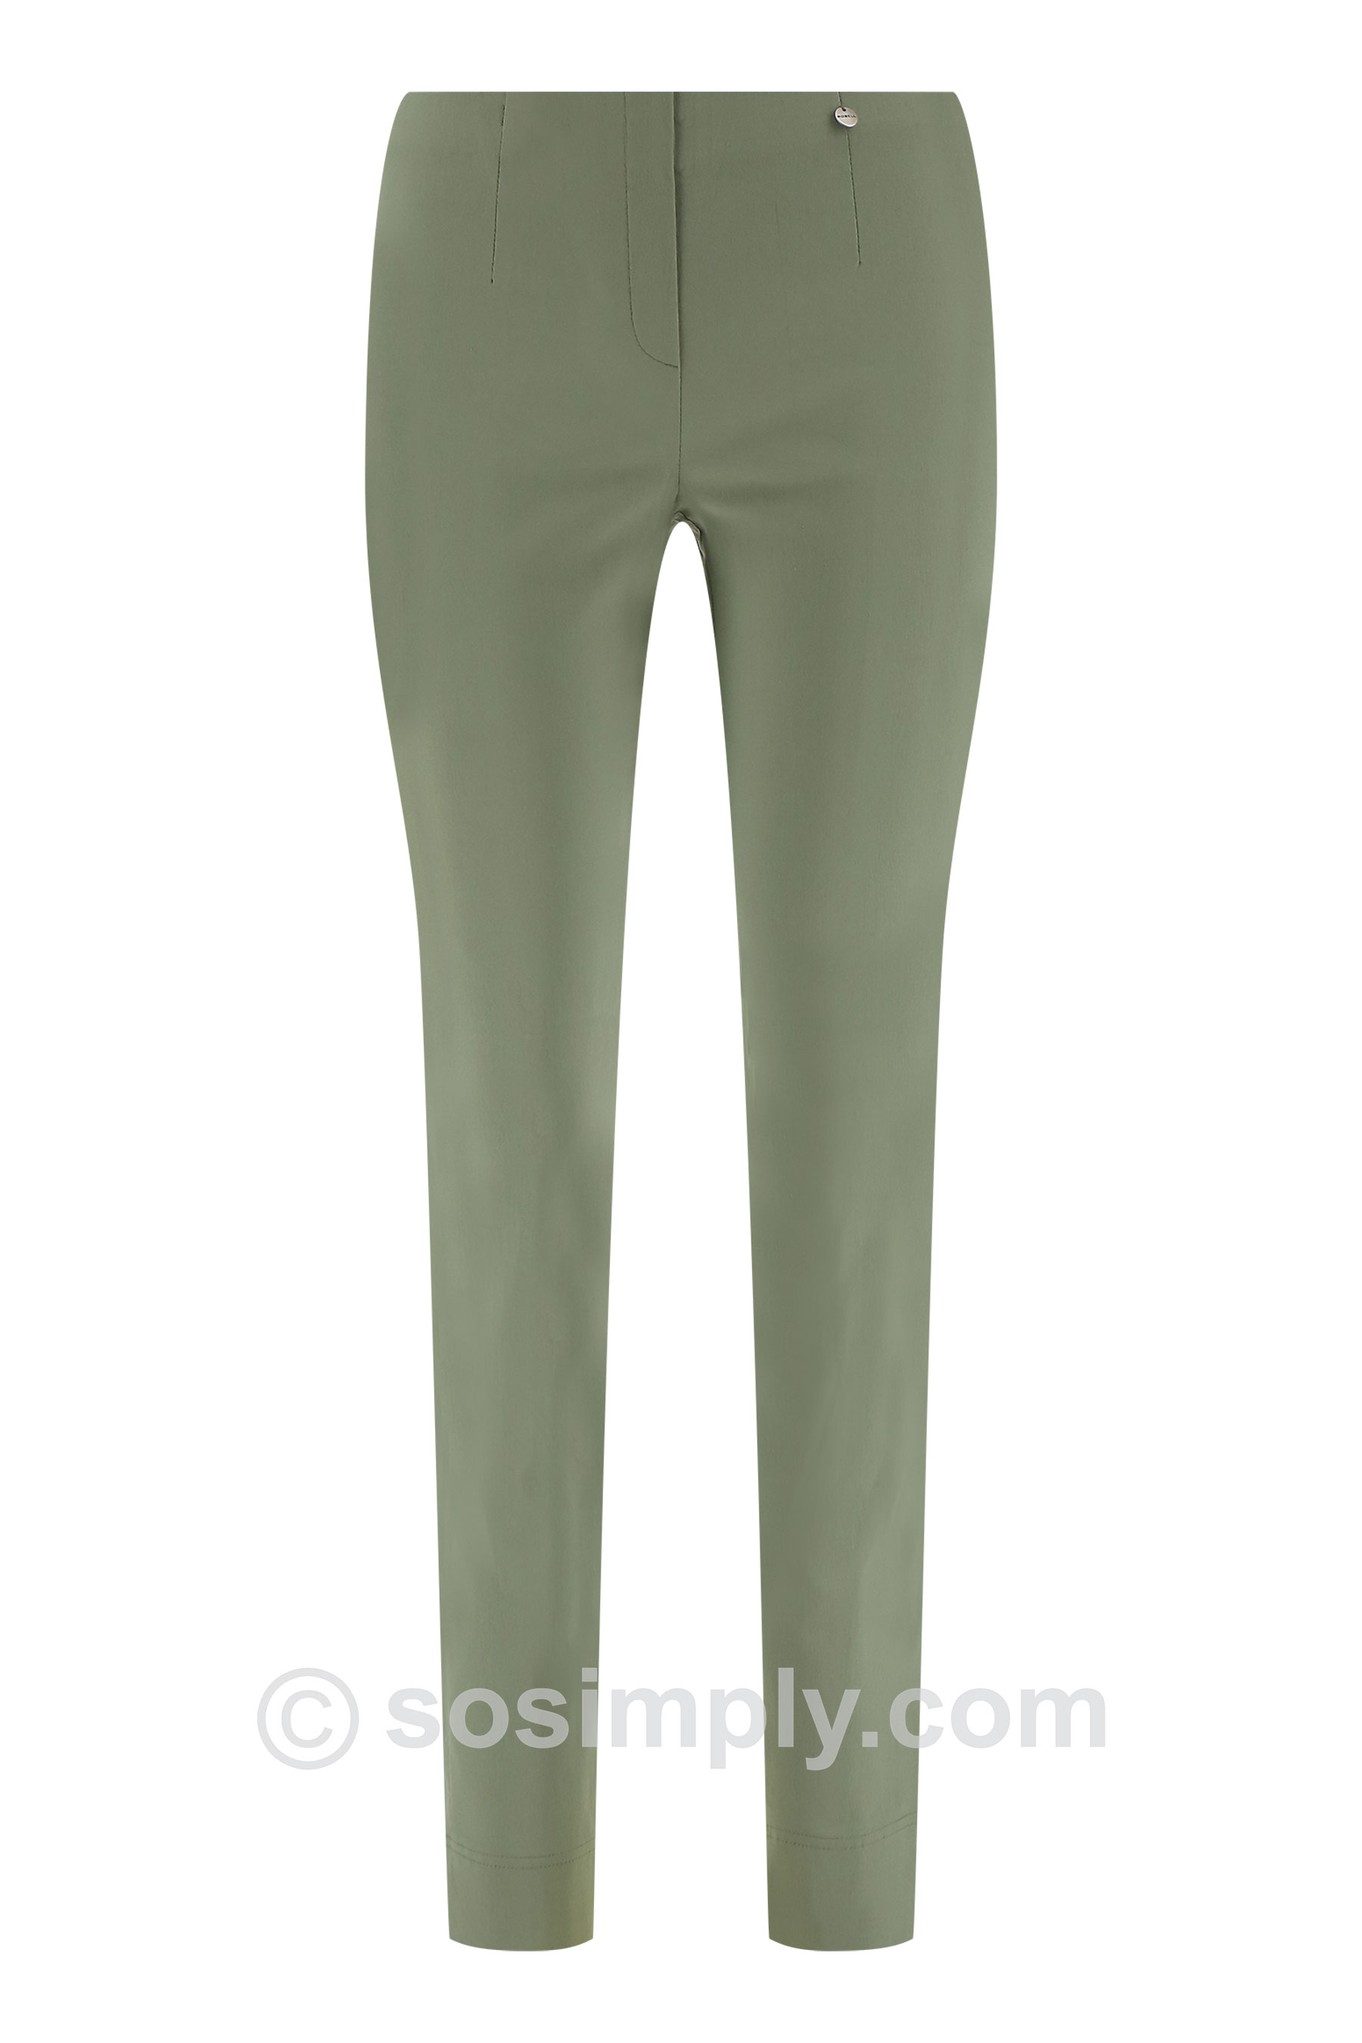 Robell Marie Petite Trousers